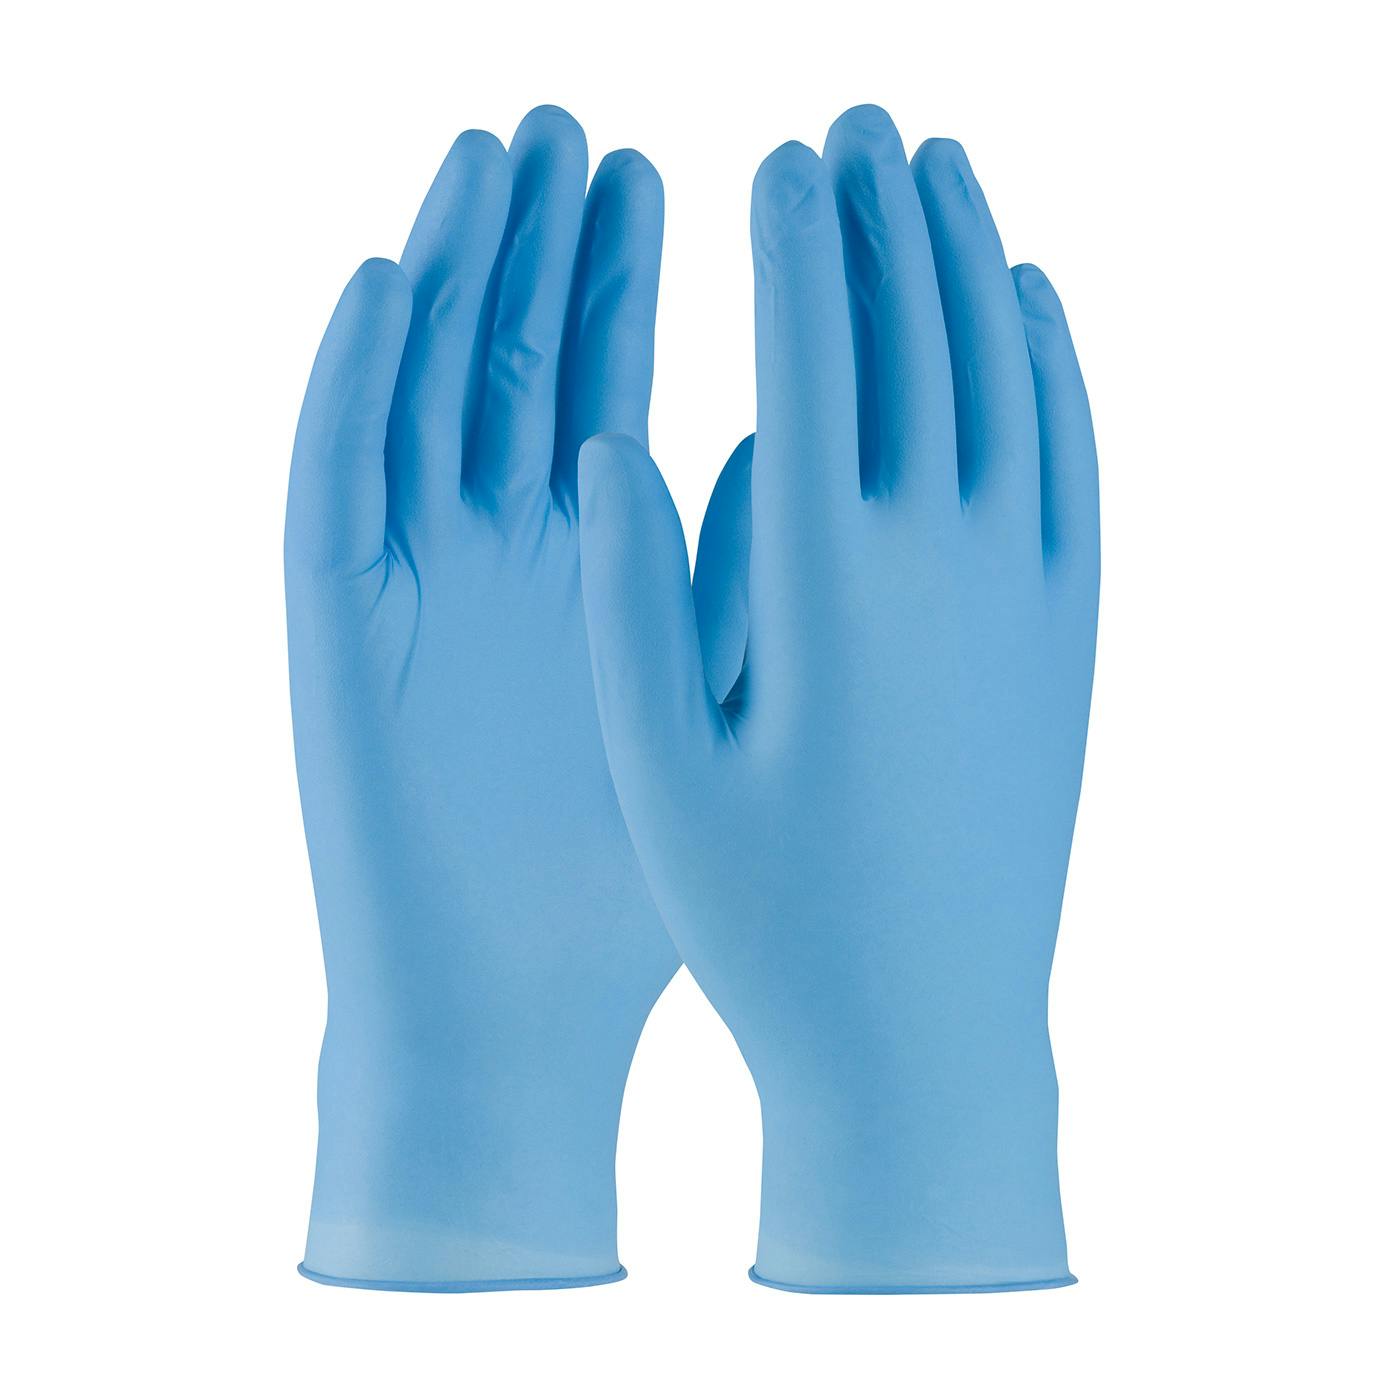 Ambi-dex® Overdrive Disposable Nitrile Glove, Powder Free with Textured Grip - 6 mil (63-336PF)_1